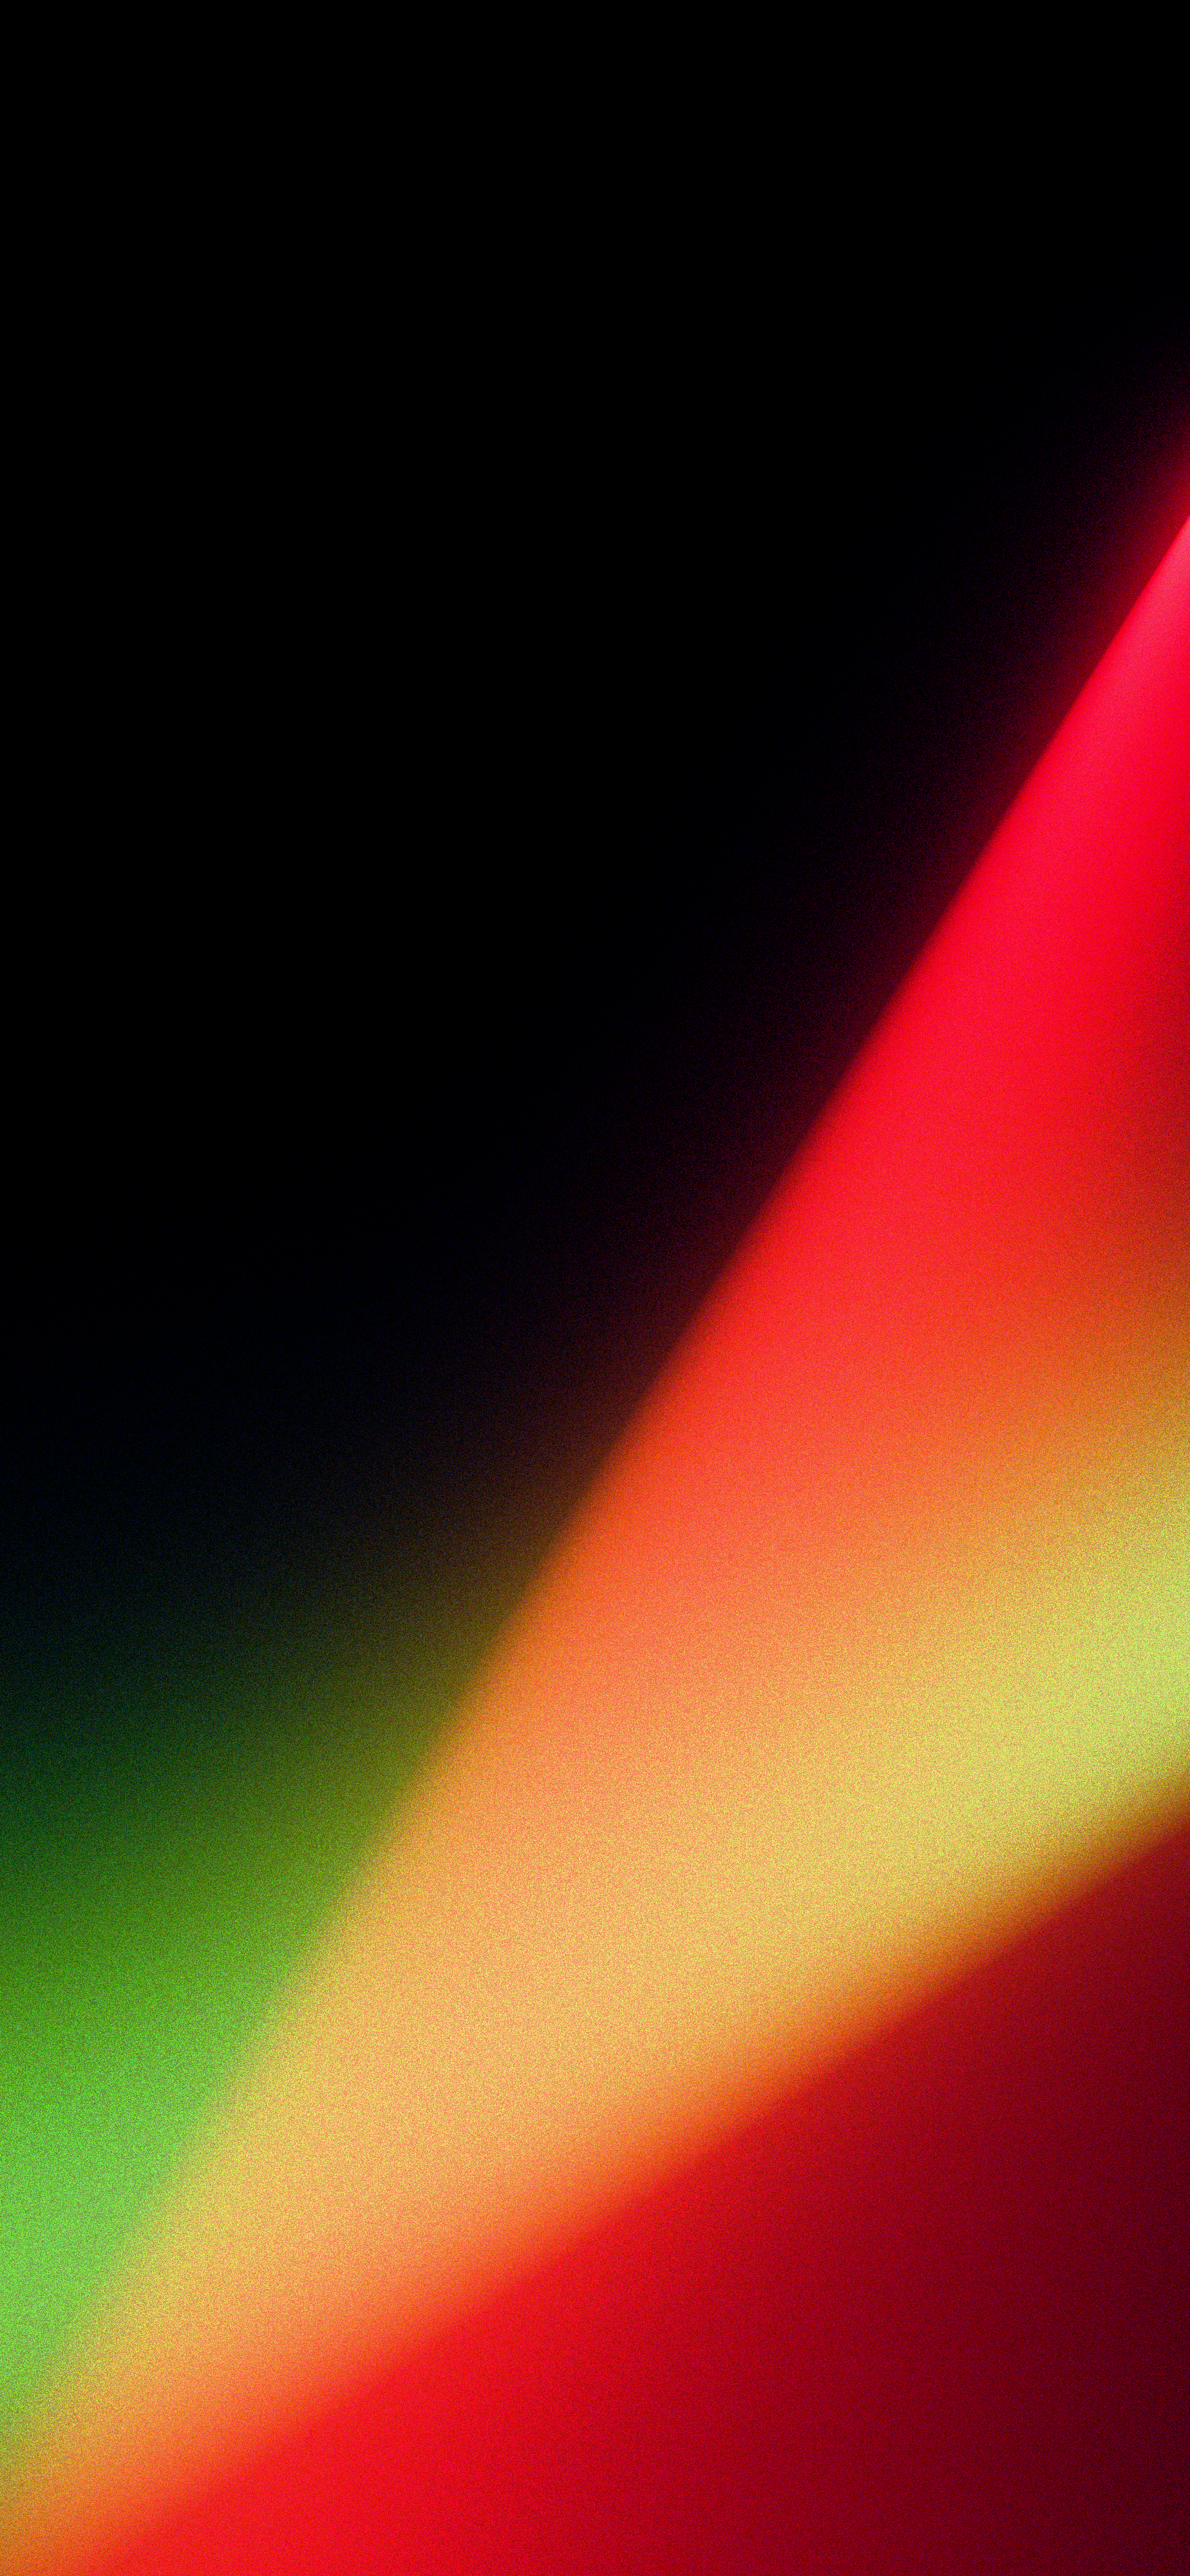 Here are the Unity Lights wallpaper for the iPhone, iPad and Mac